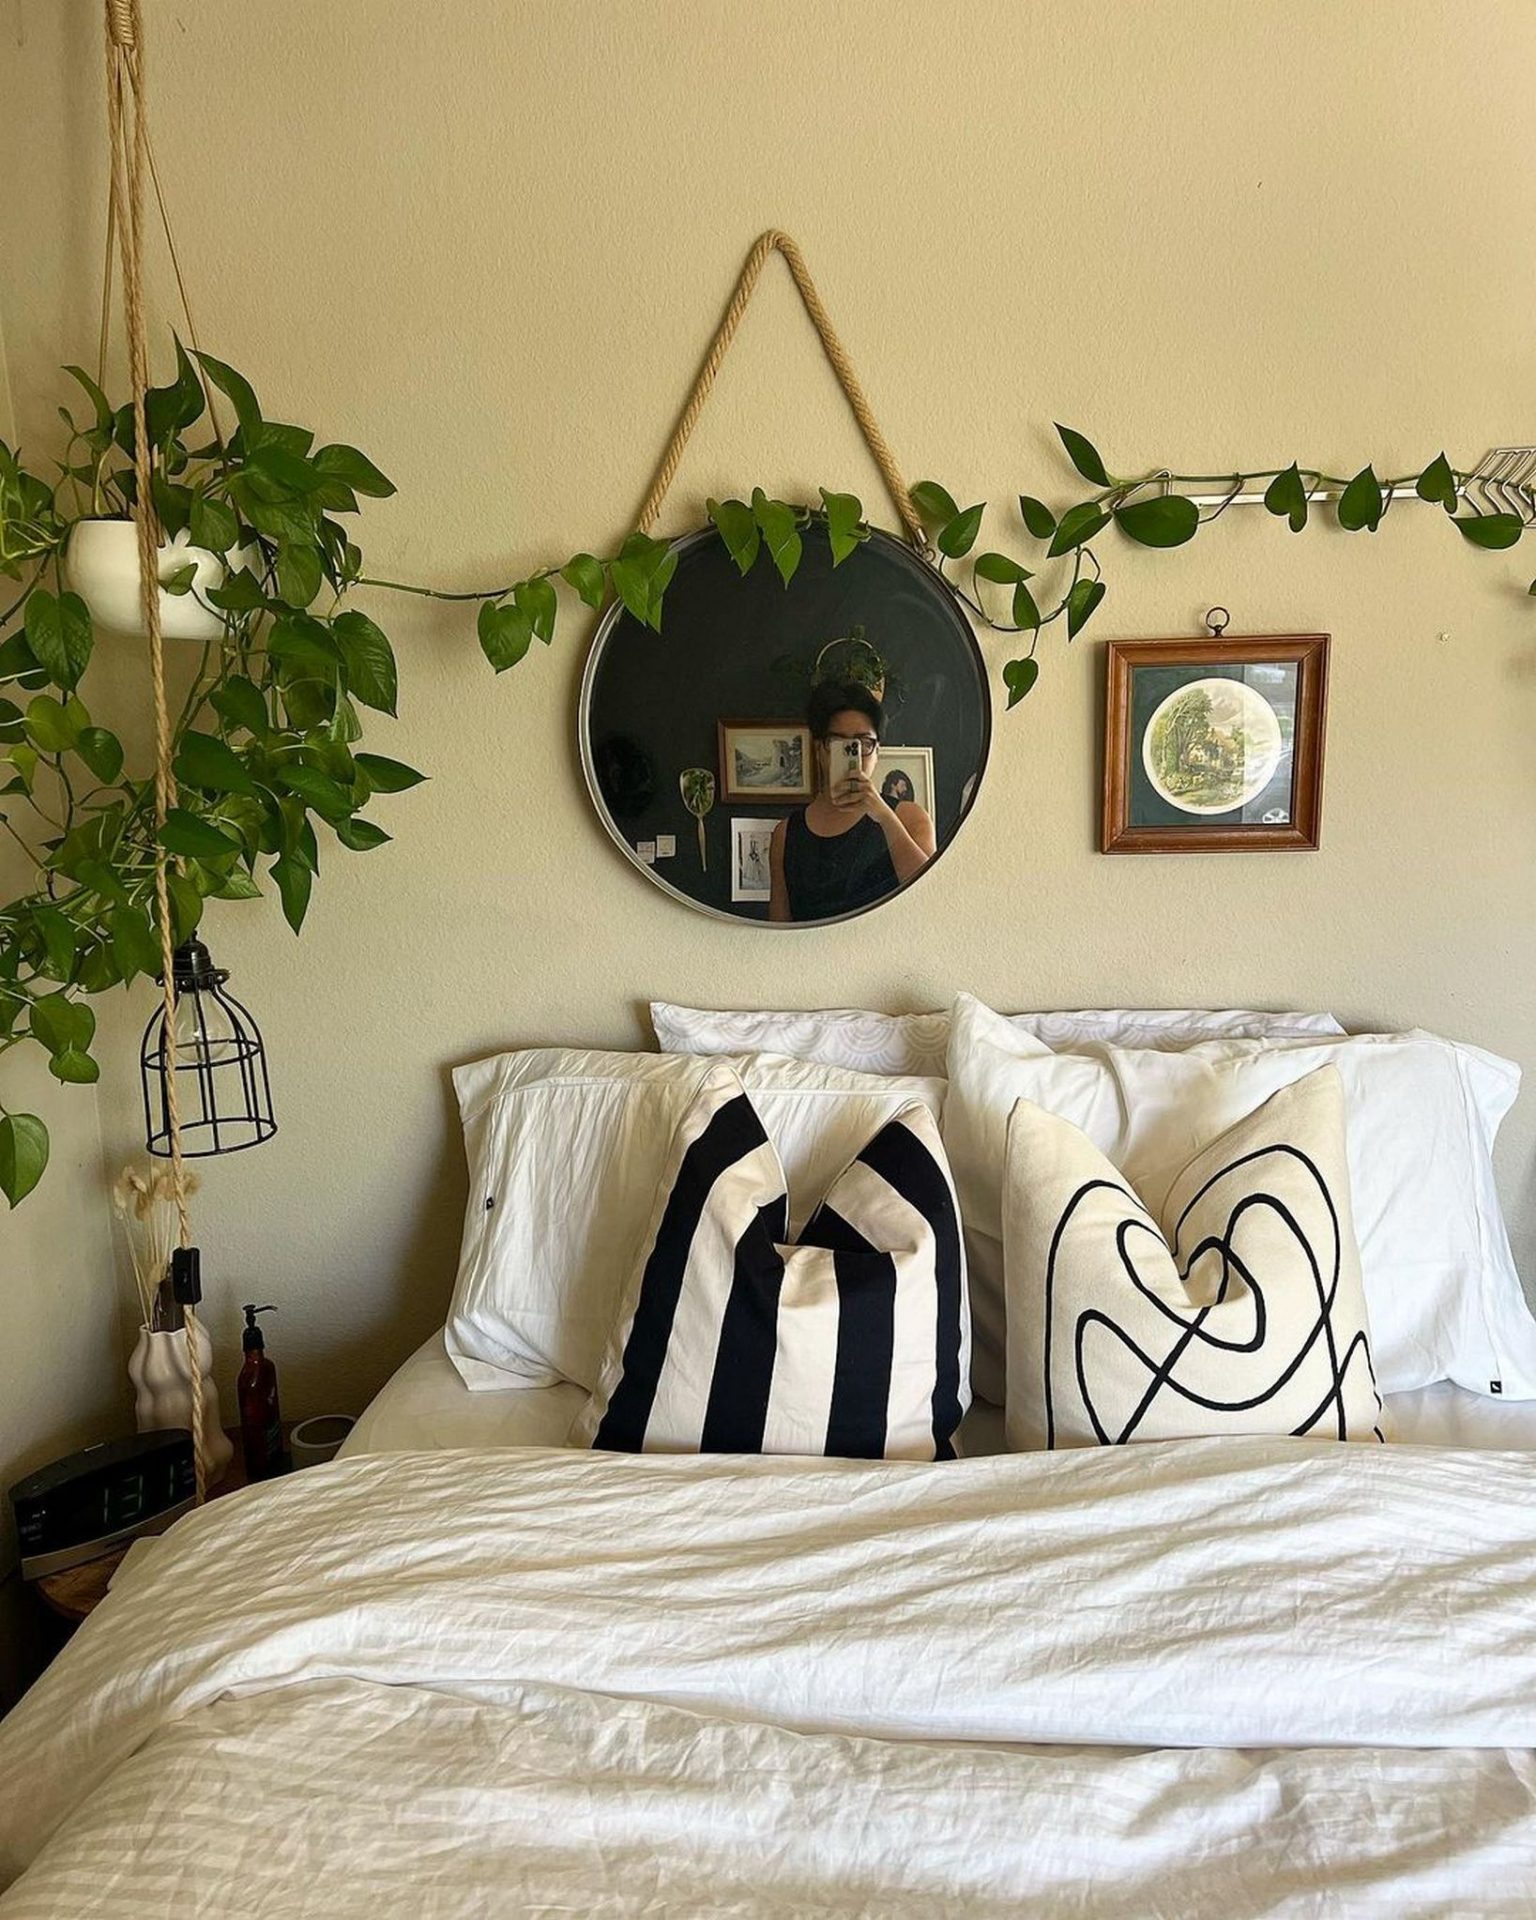 Aesthetic Bedroom Decor if you’re trying to redecorate your bedroom but are having trouble coming up with ideas, try mixing and matching aesthetic bedroom decor. Try adding a full-length mirror, faux hanging vines, floor plants, and chic clothing racks. These are just a few ways to inject some fun and personality into your room. 